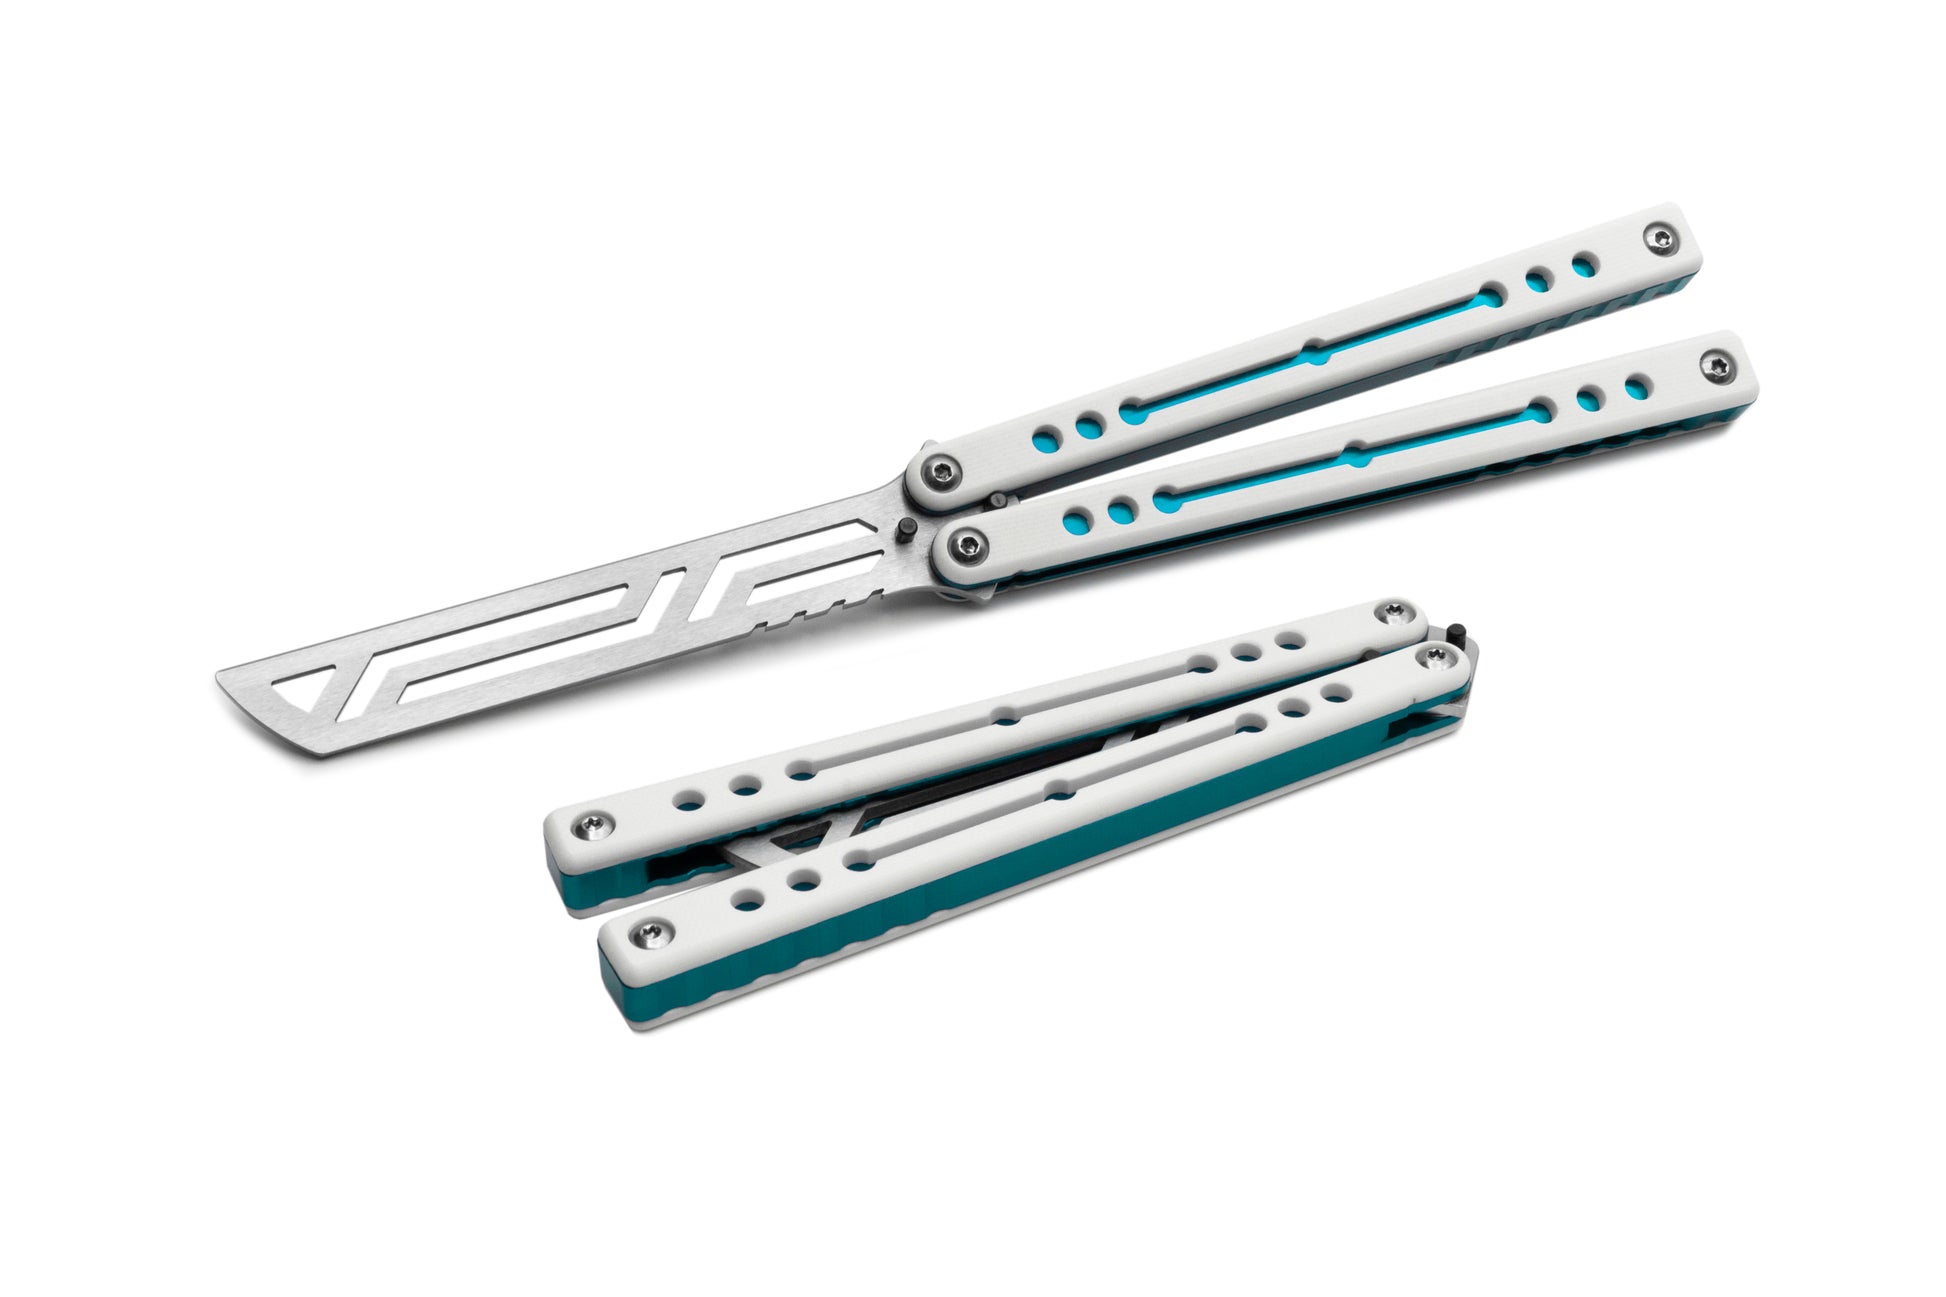 winter teal nautilus v2 balisong butterfly knife trainer g10 